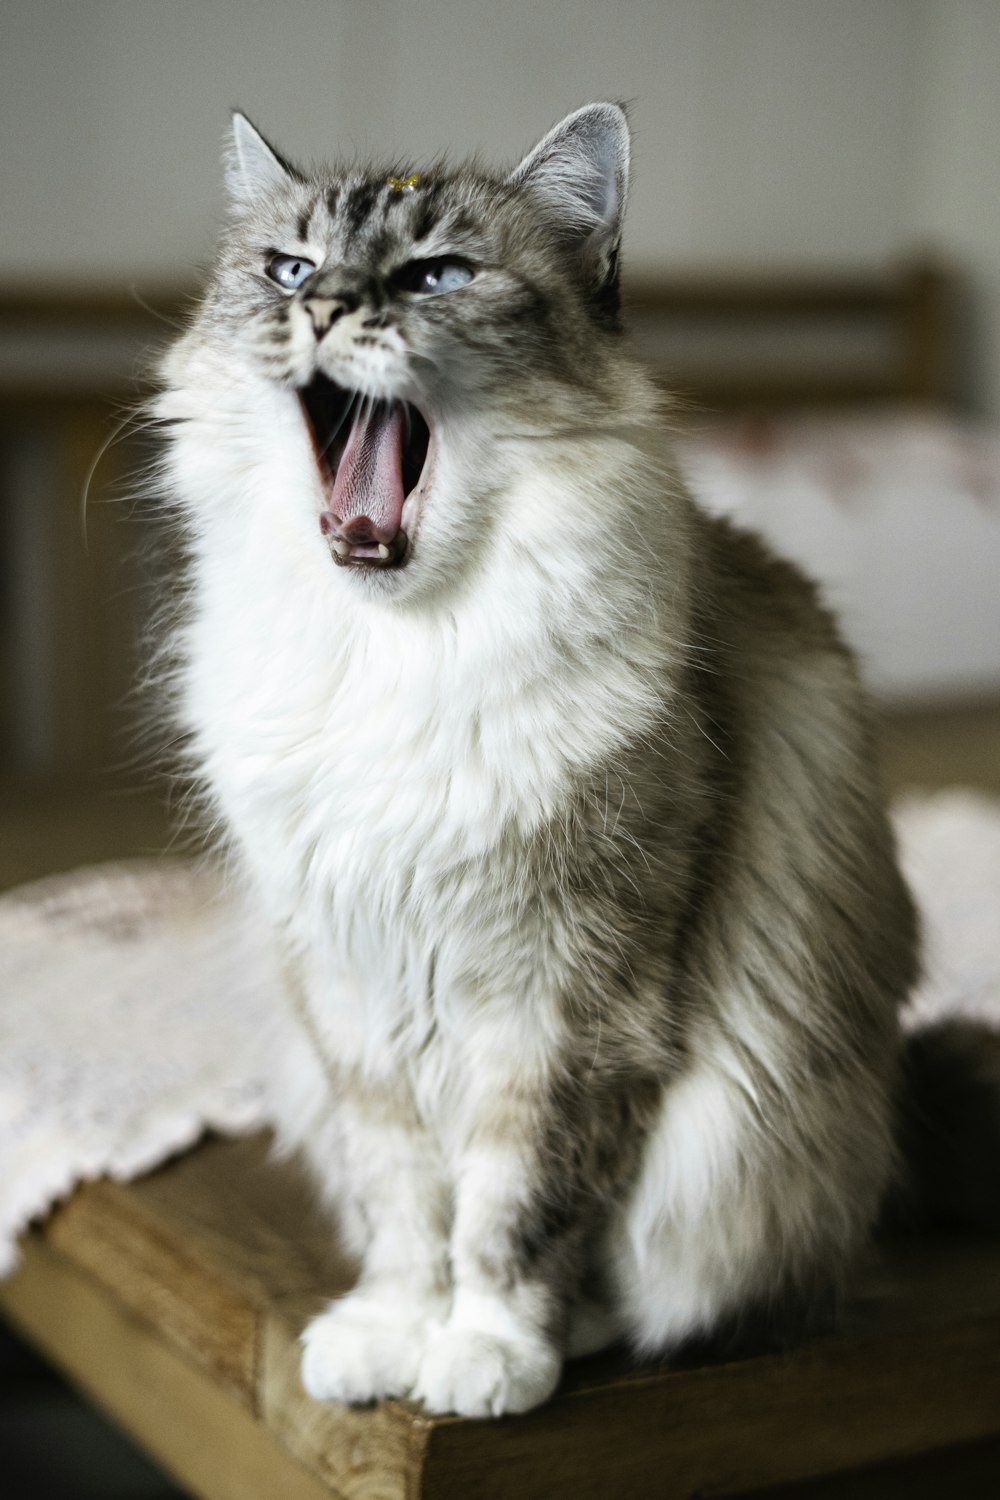 a cat yawns while sitting on a bed